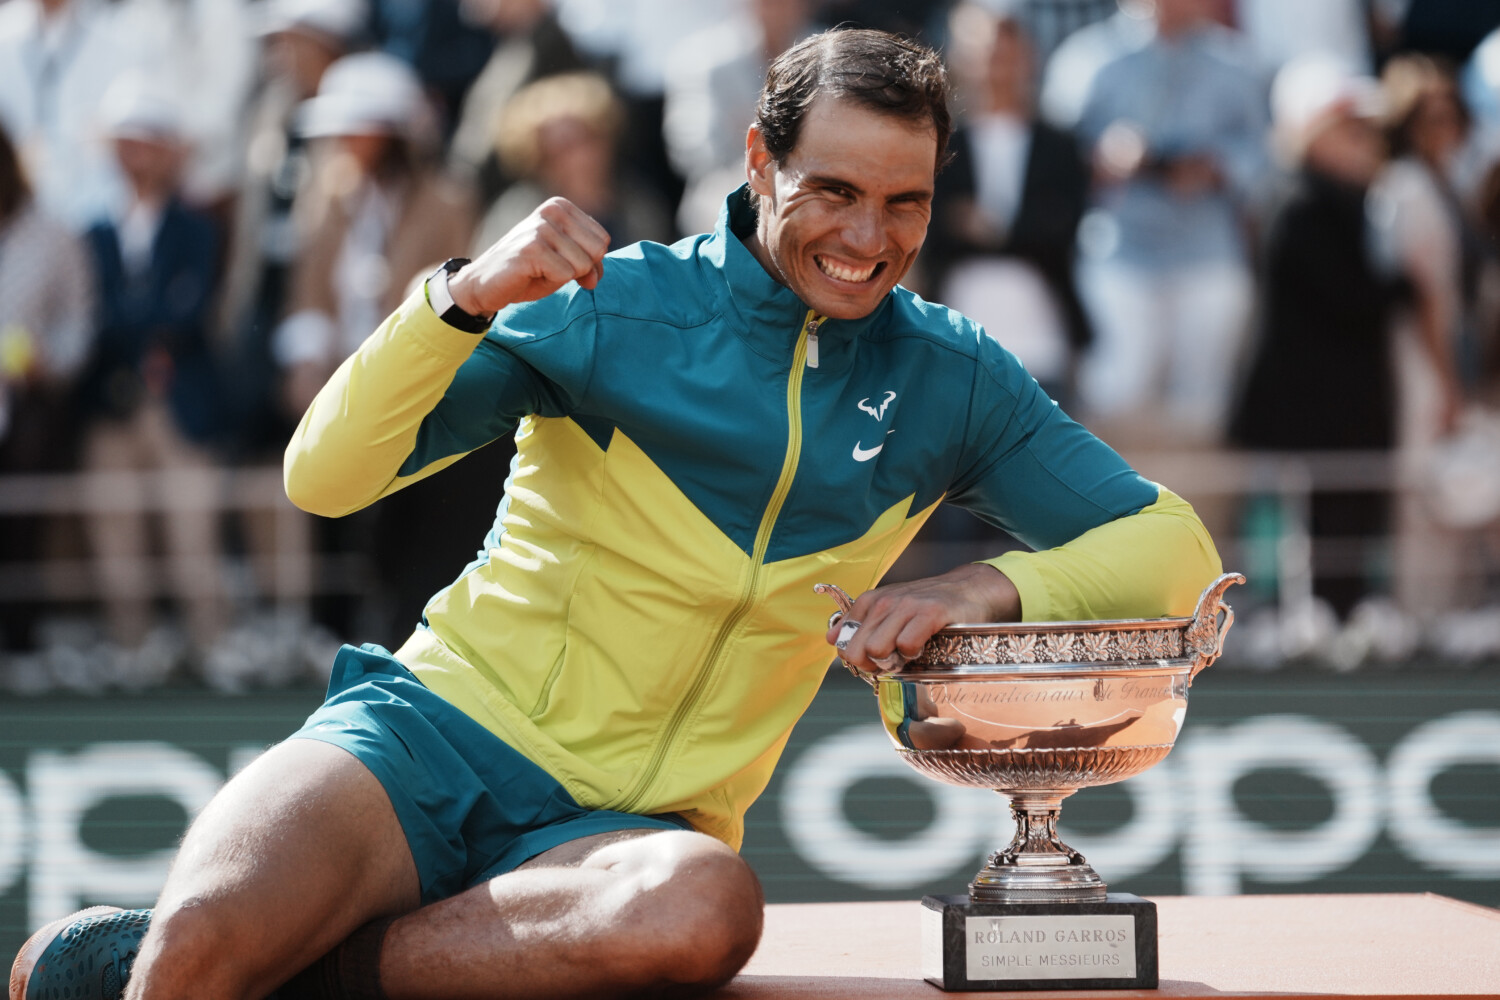 Rafael Nadal wins 14th French Open, 22nd Grand Slam title